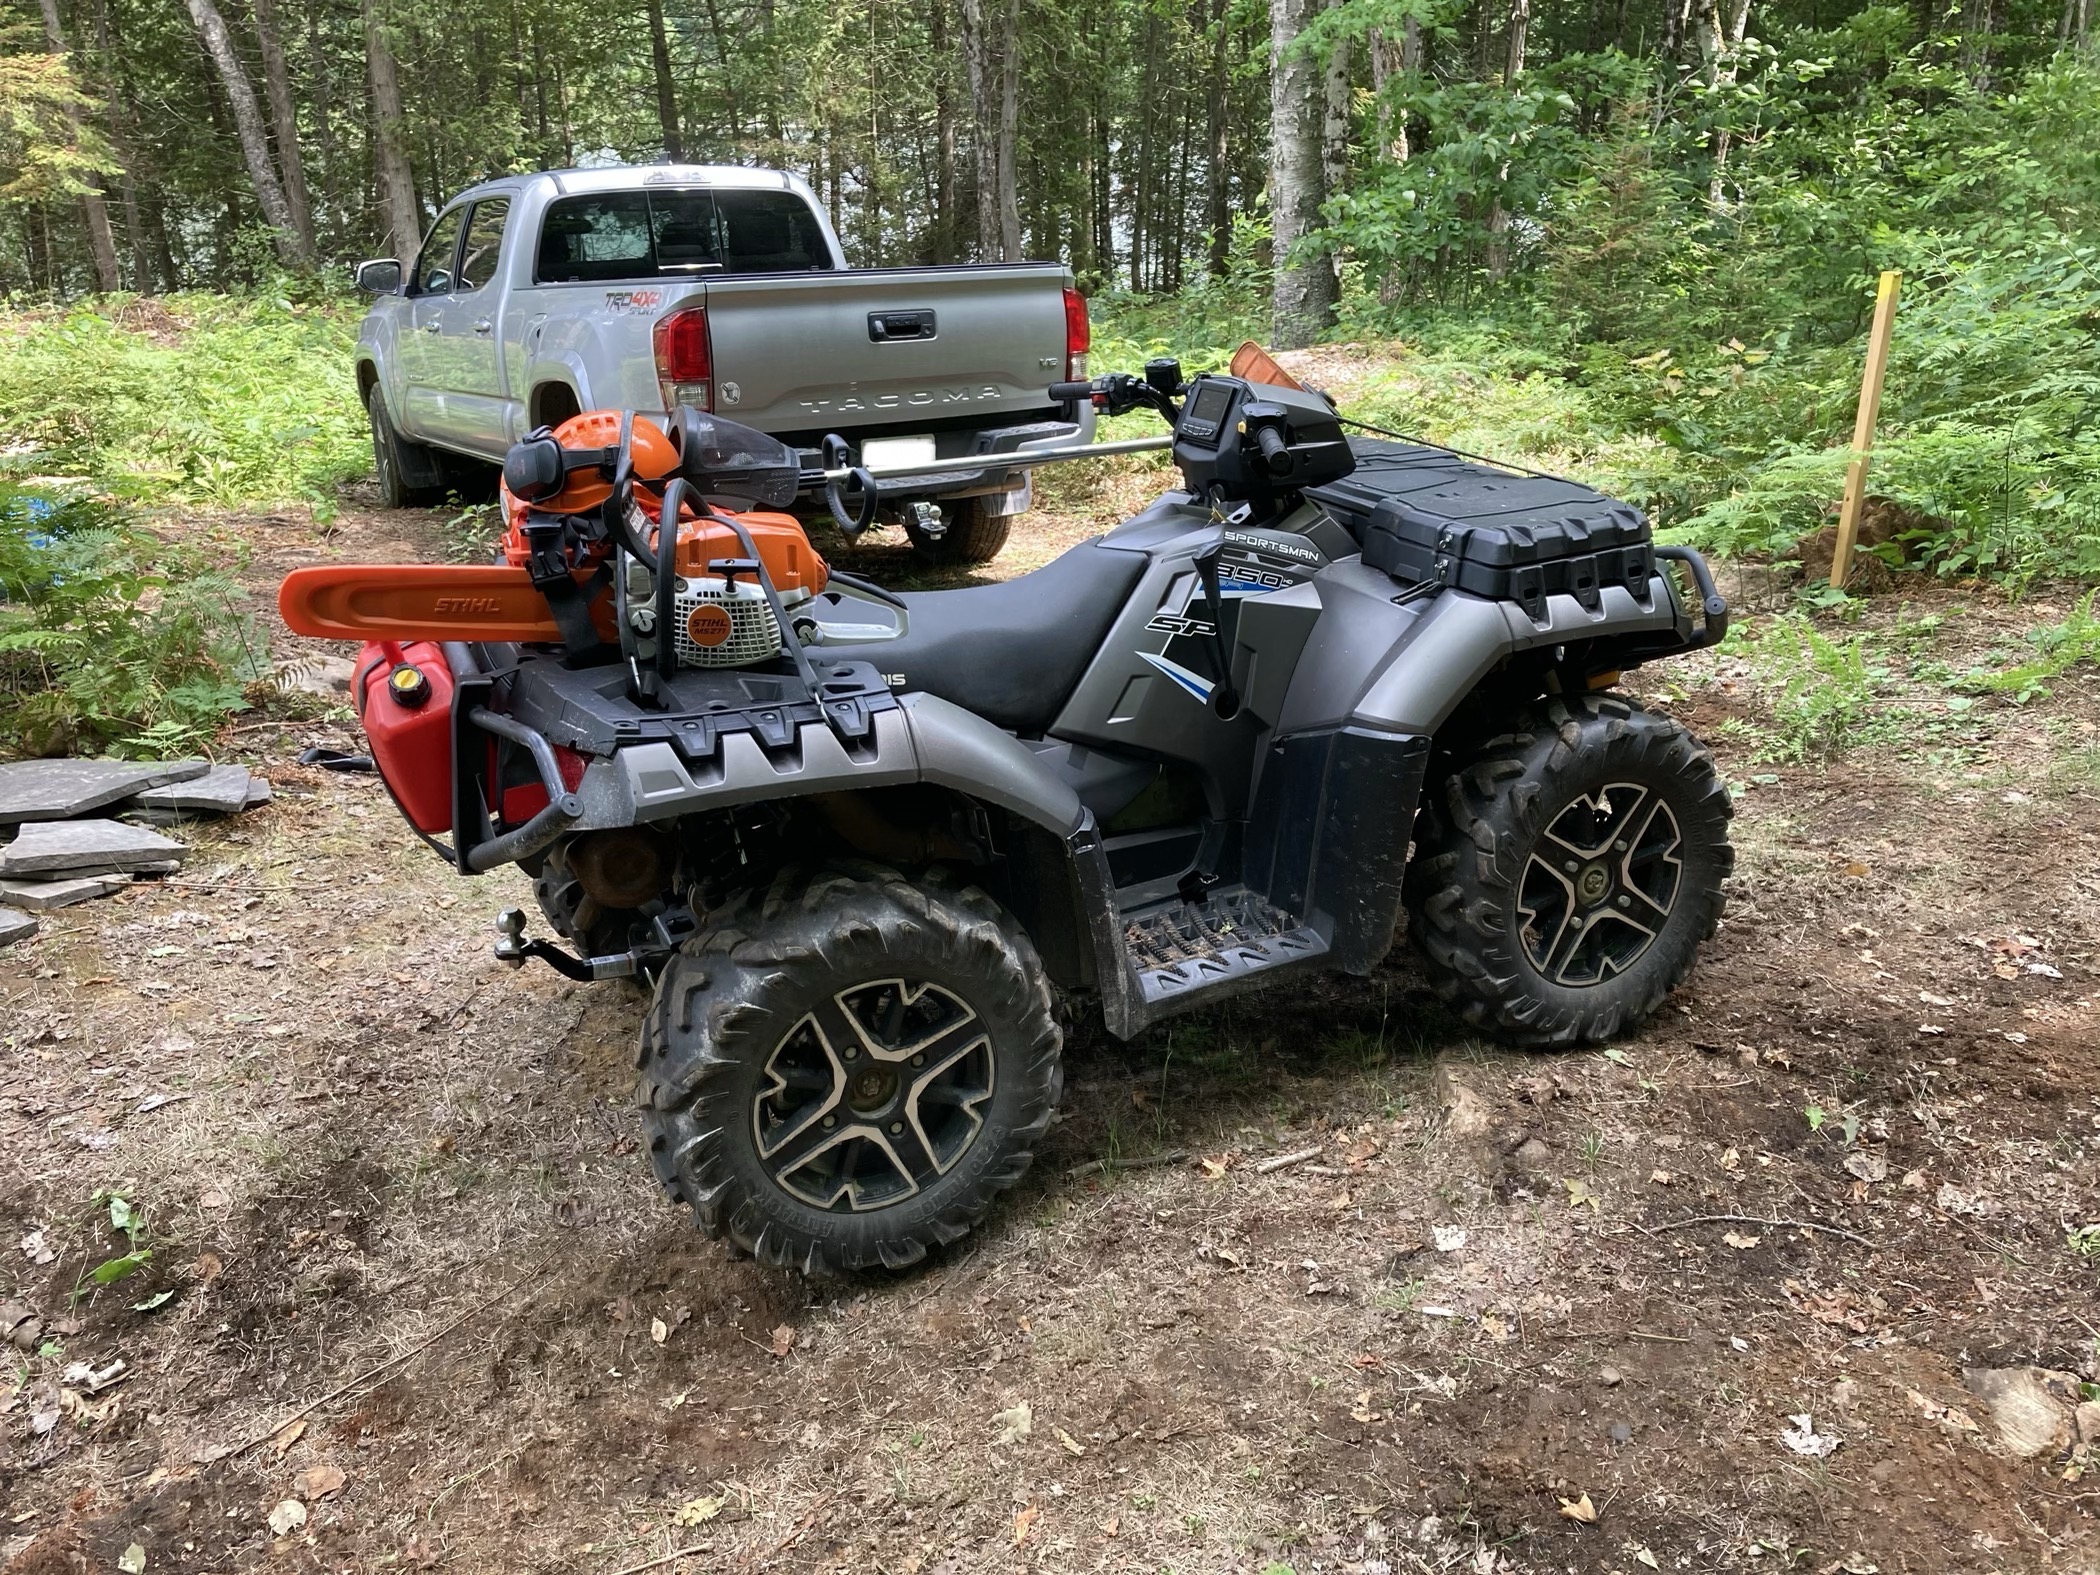 ATV in front of my Tacoma, with chainsaw, weed wacker, and accessories strapped to the back.